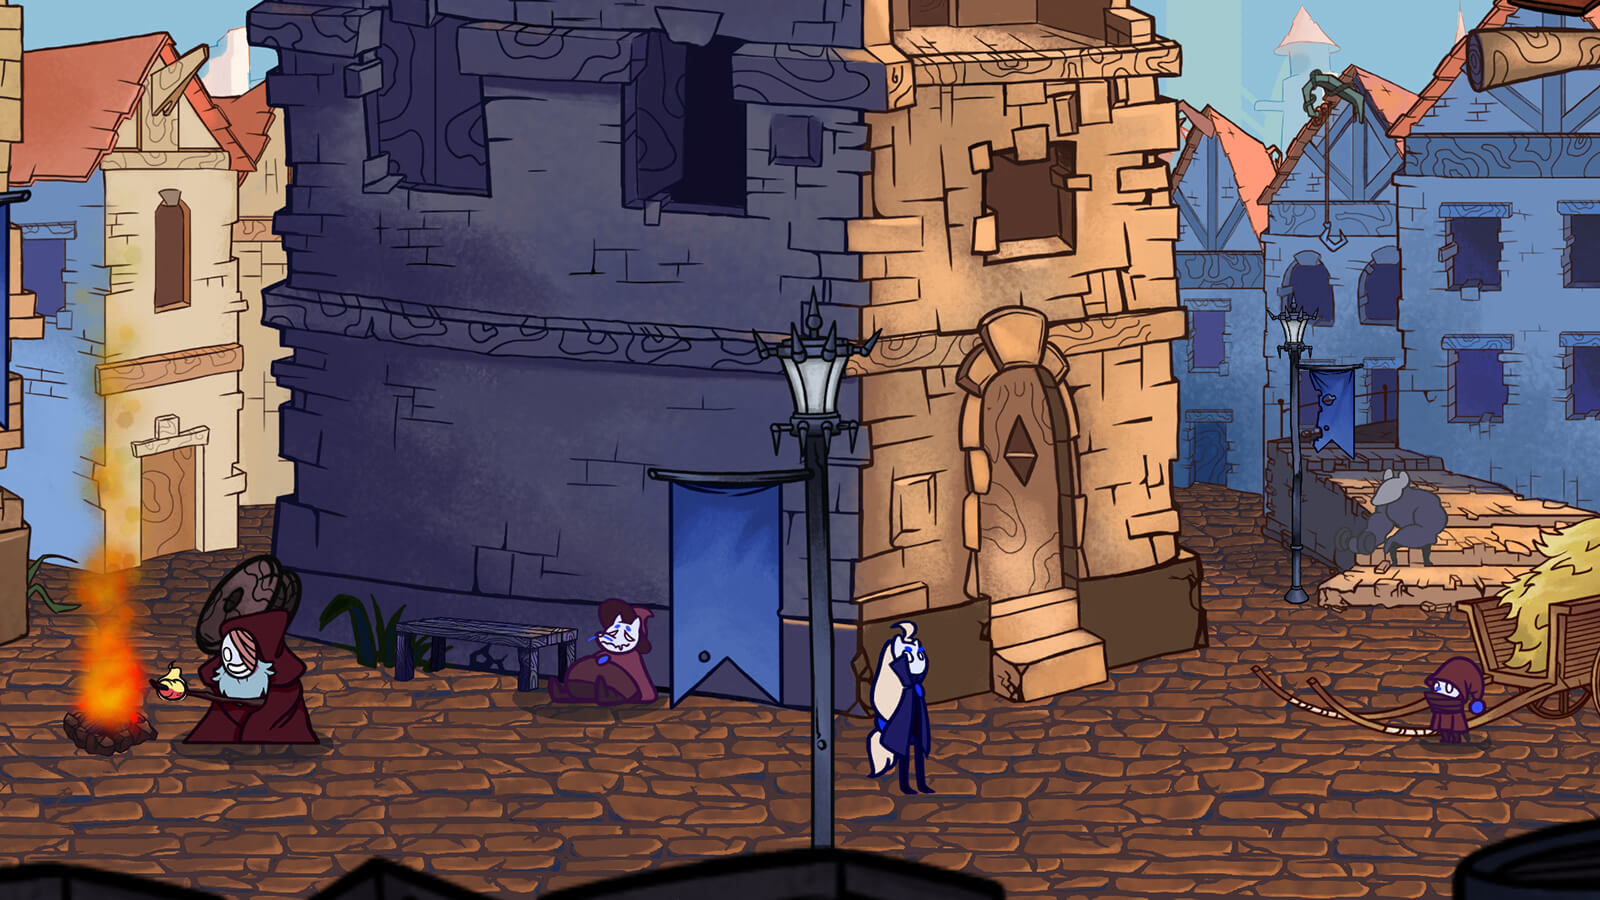 A village scene featuring a character at a campfire, another sleeping against a building, and a giant rat